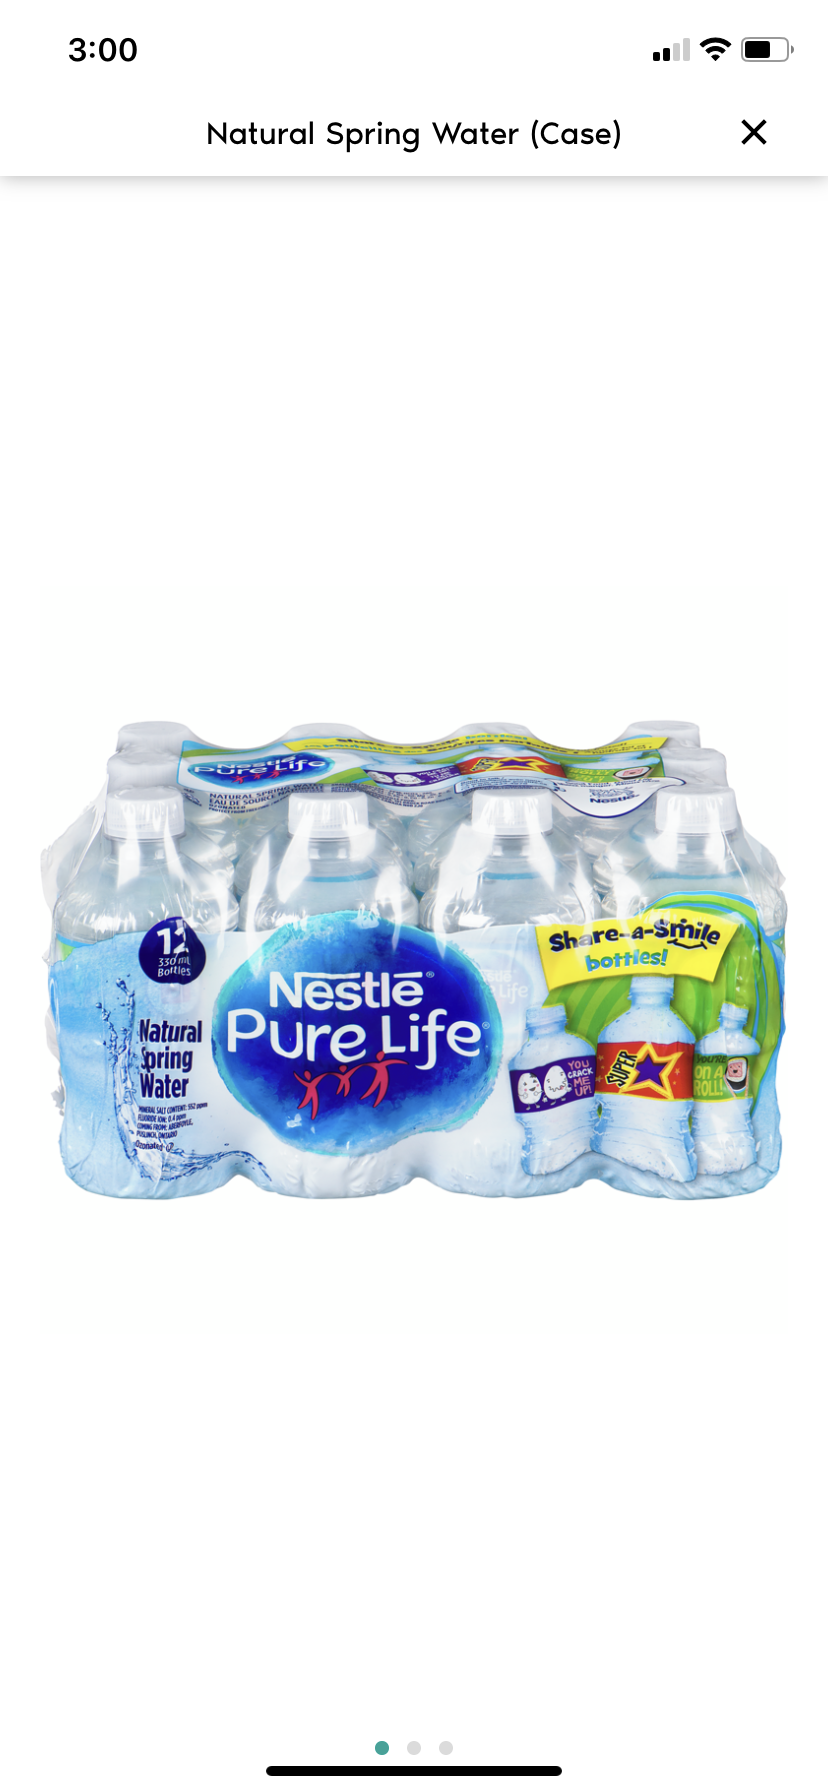 Nestle natural spring water case 12x500ml